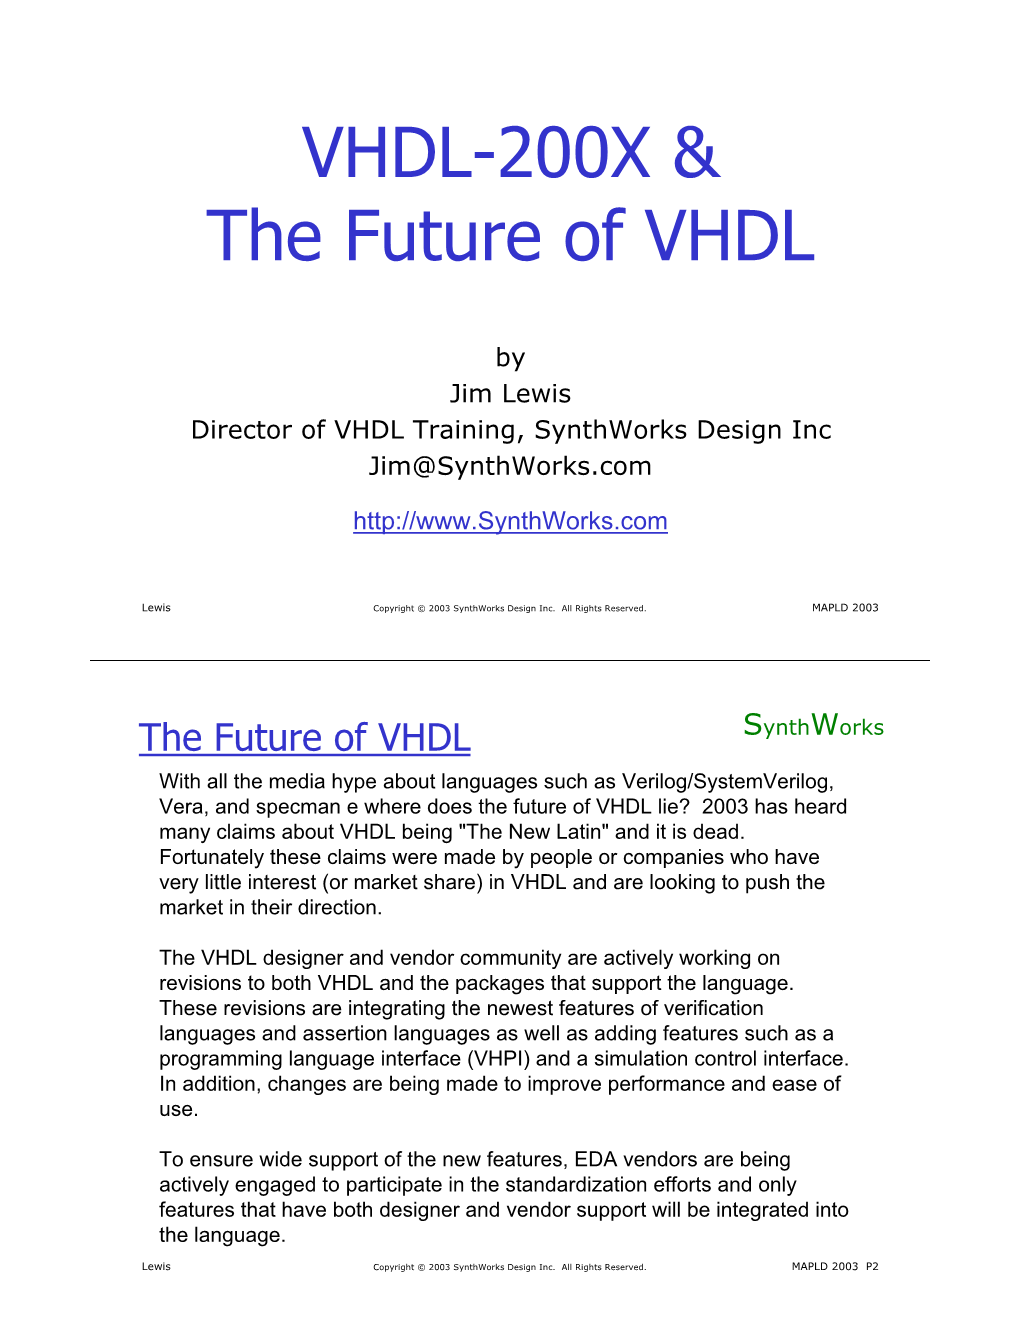 VHDL-200X & the Future of VHDL